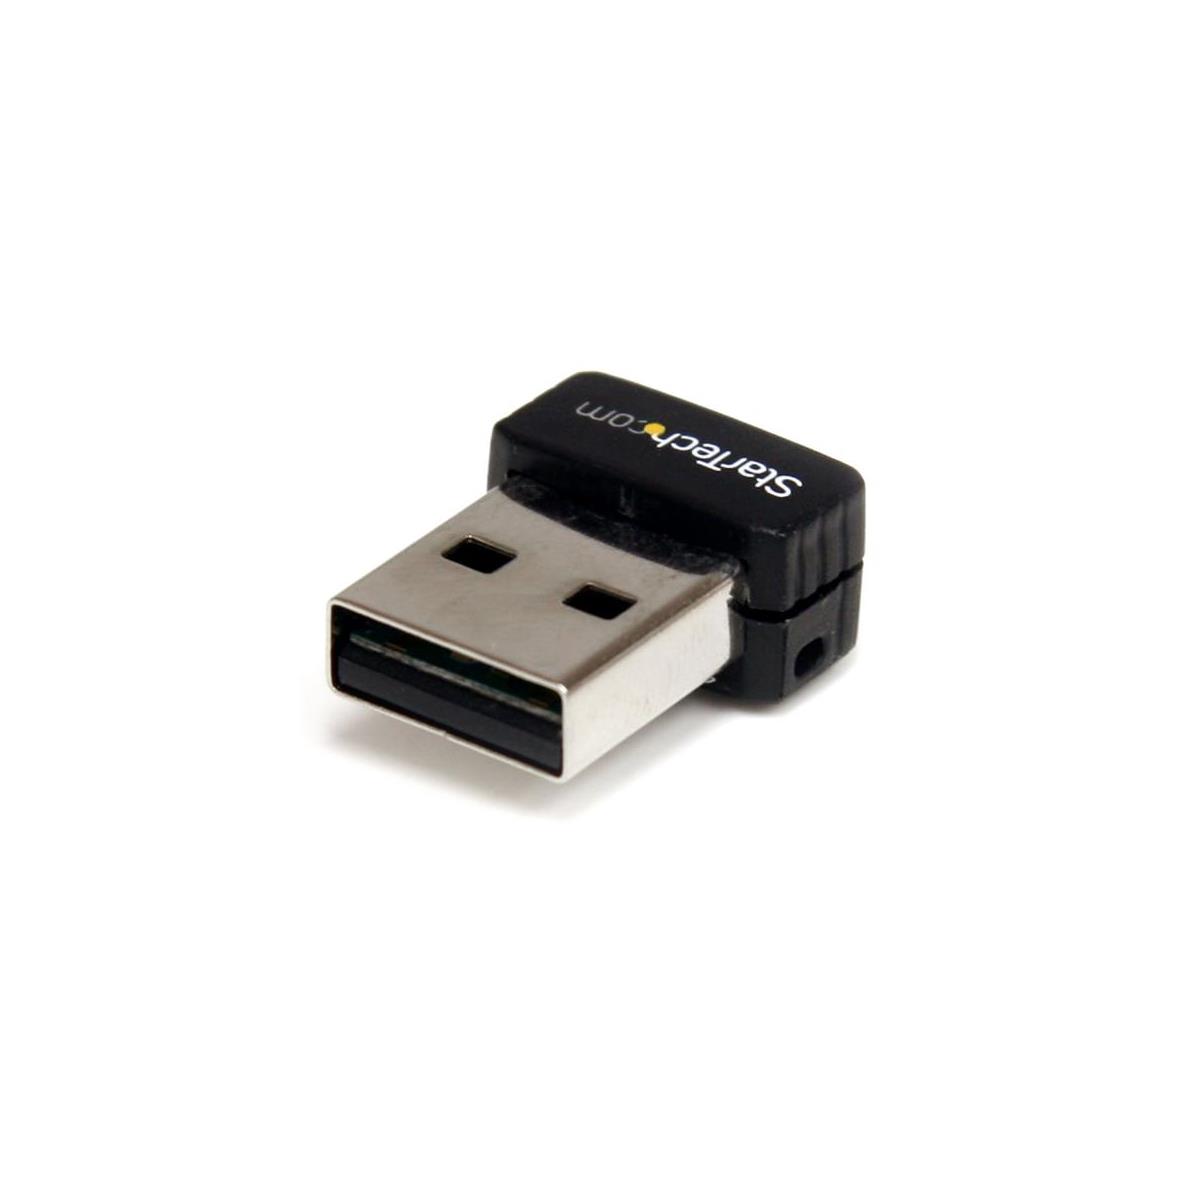 Image of StarTech USB 150Mbps 802.11n/g 1T1R Mini Wireless N Network Adapter